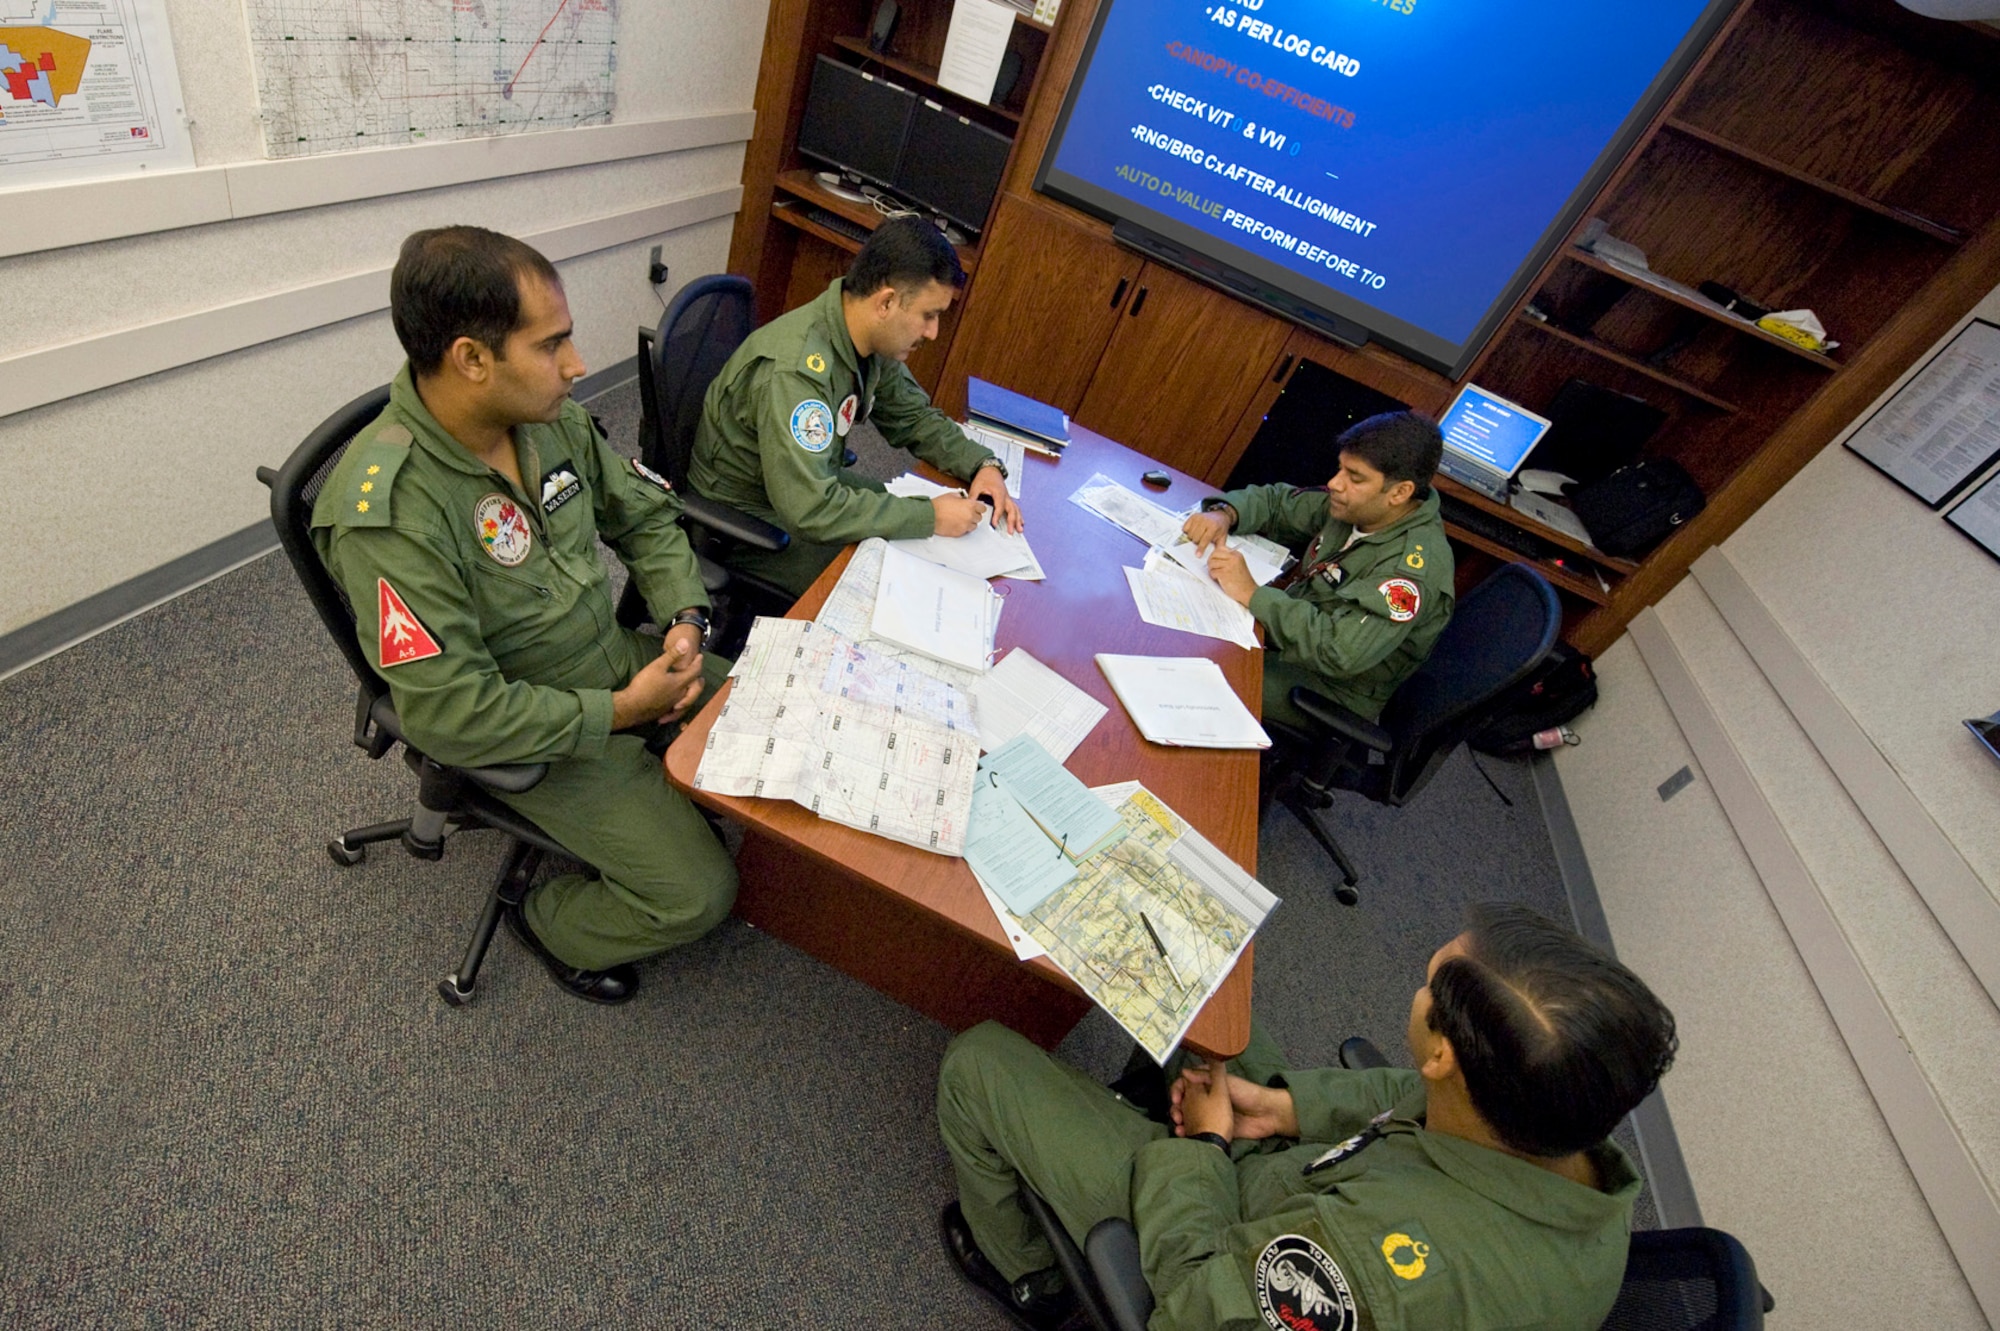 NELLIS AIR FORCE BASE, Nev.-- Wing Commander Hatmi of the Pakistan Air Force briefs fellow crew members prior to participating in the Green Flag West 10-9 exercise at Nellis Aug. 11. The U.S. Air Force is hosting the Pakistan and Royal Saudi Air Force's pilots and support personnel during Green Flag-West Aug. 9-20 at Nellis Air Force Base, Nev.  Green Flag-West provides a realistic air-land integration training environment for joint forces preparing to support worldwide combat operations. (U.S. Air Force Photo by Lawrence Crespo)


